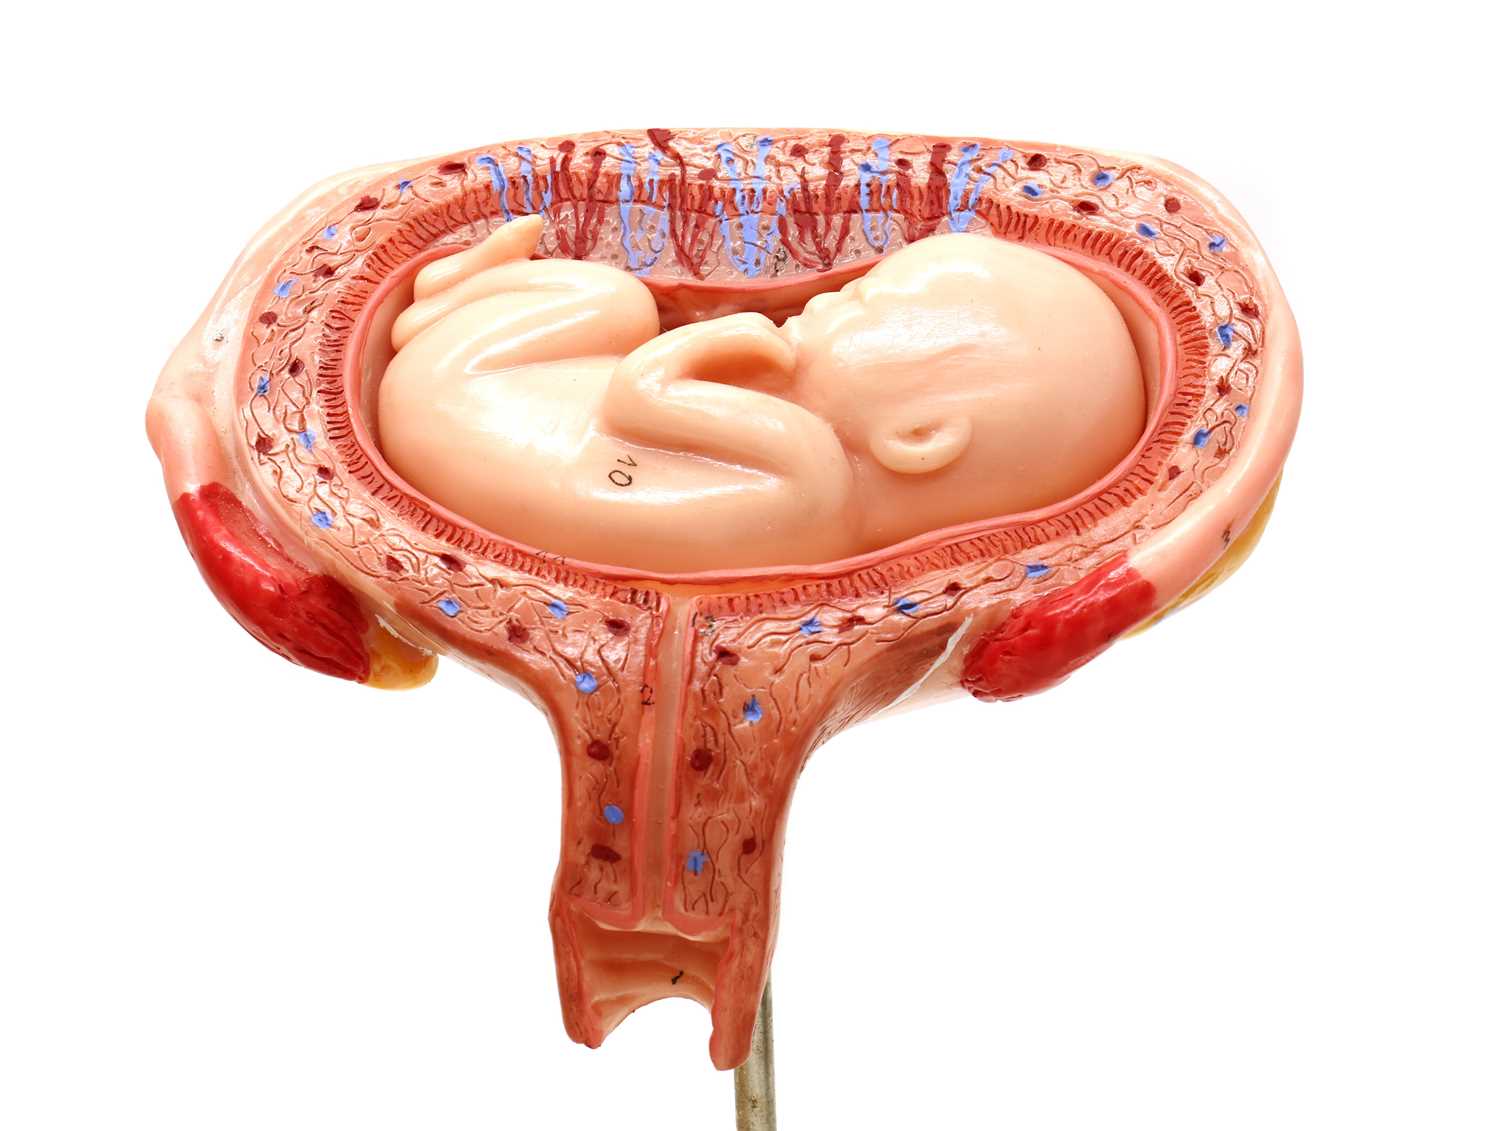 A West German plastic scientific model of a baby in a womb, - Image 4 of 6